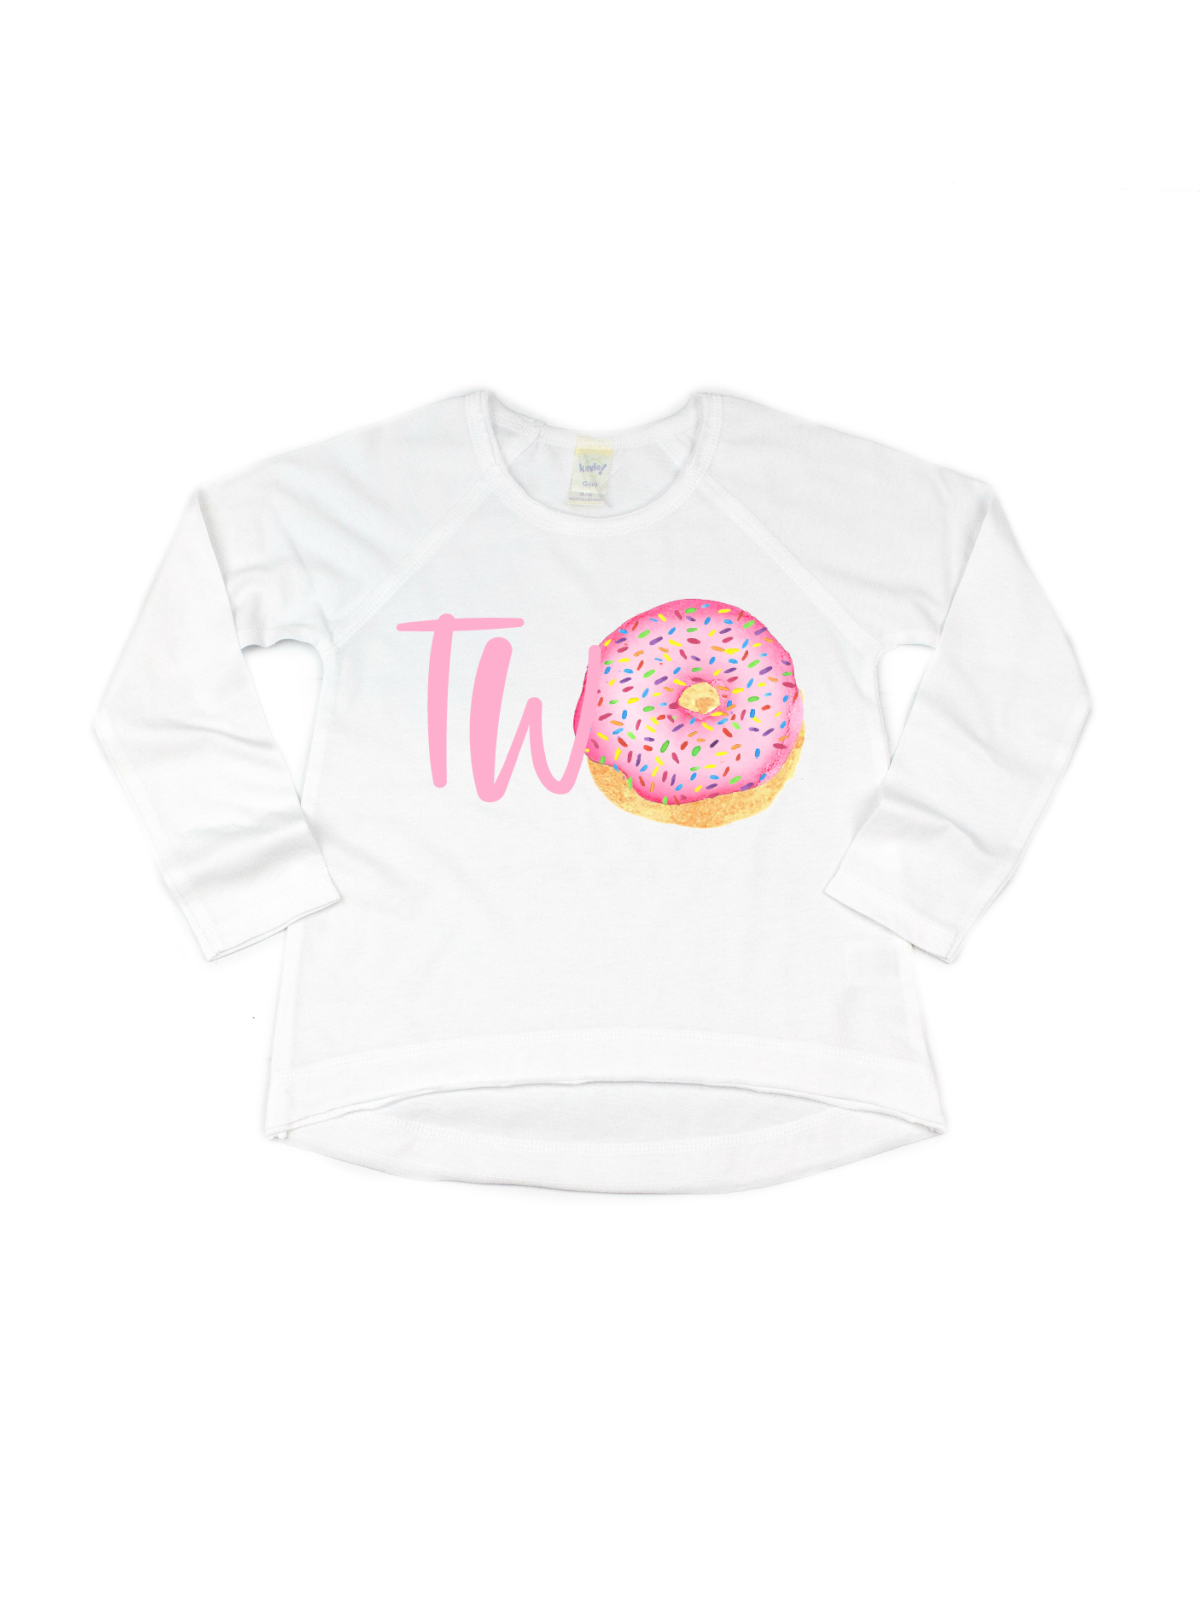 TWO pink sprinkles donut shirt long sleeve